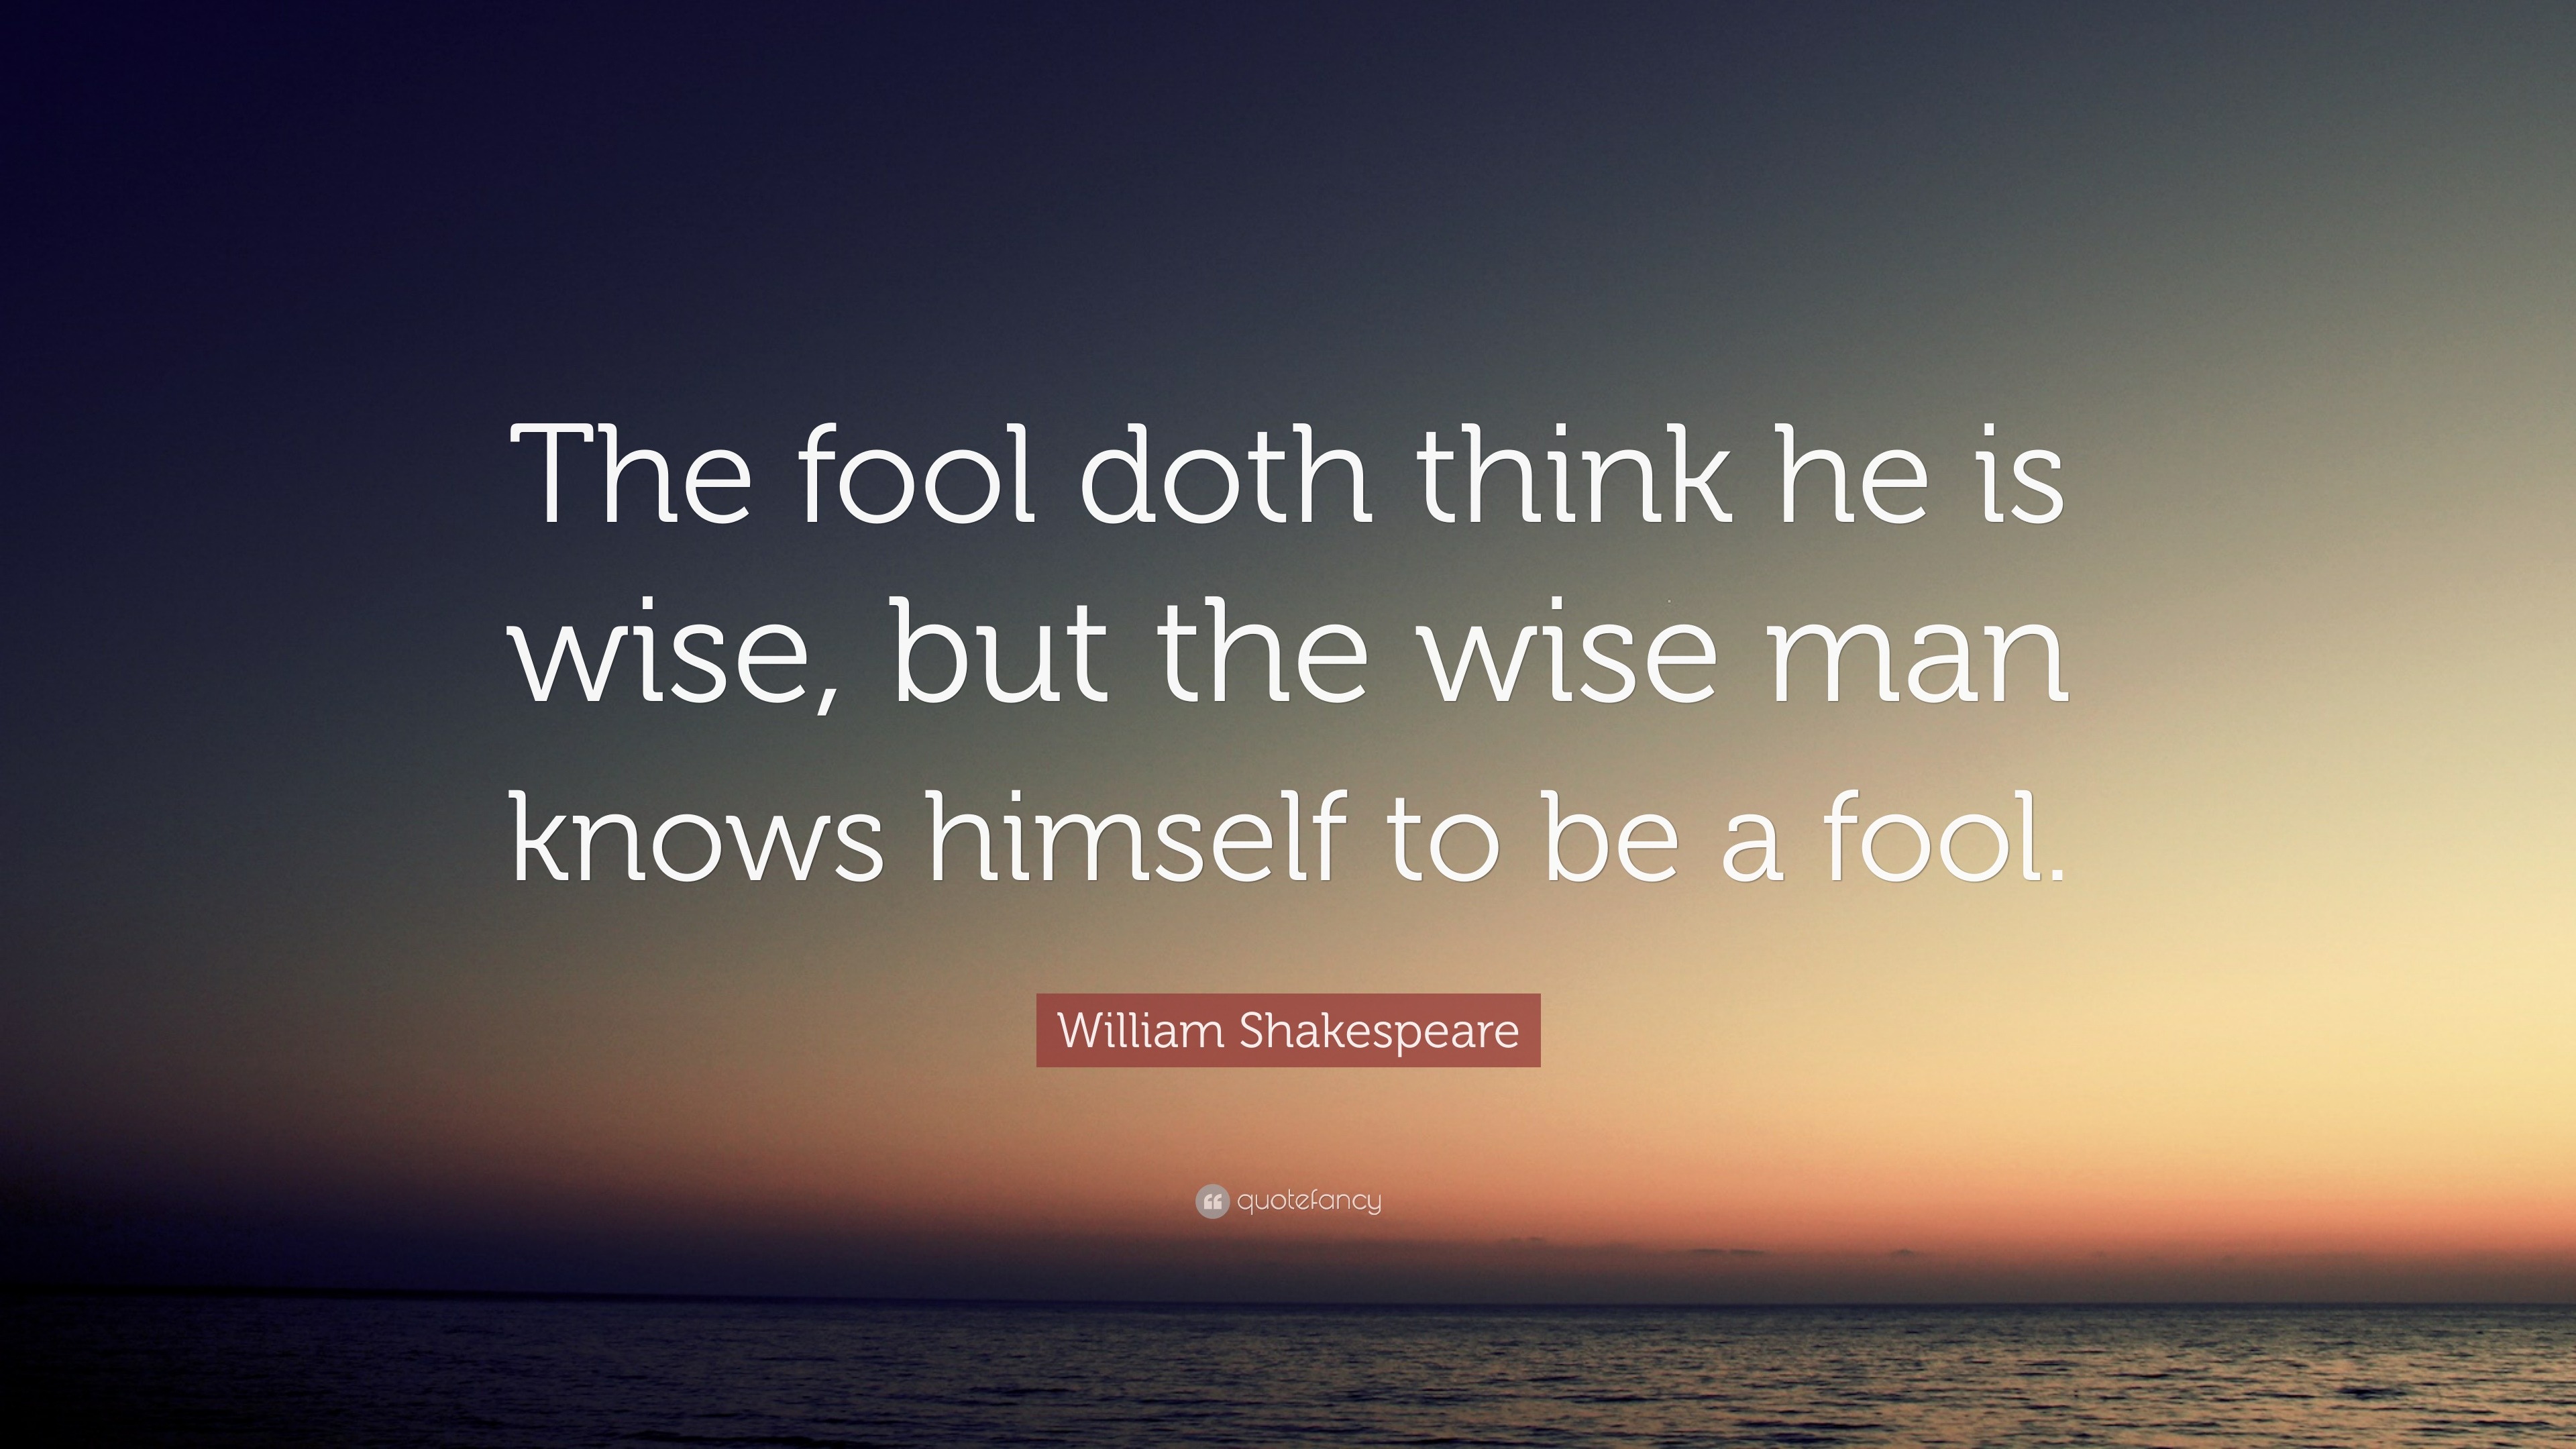 William Shakespeare Quote: “The fool doth think he is wise, but the